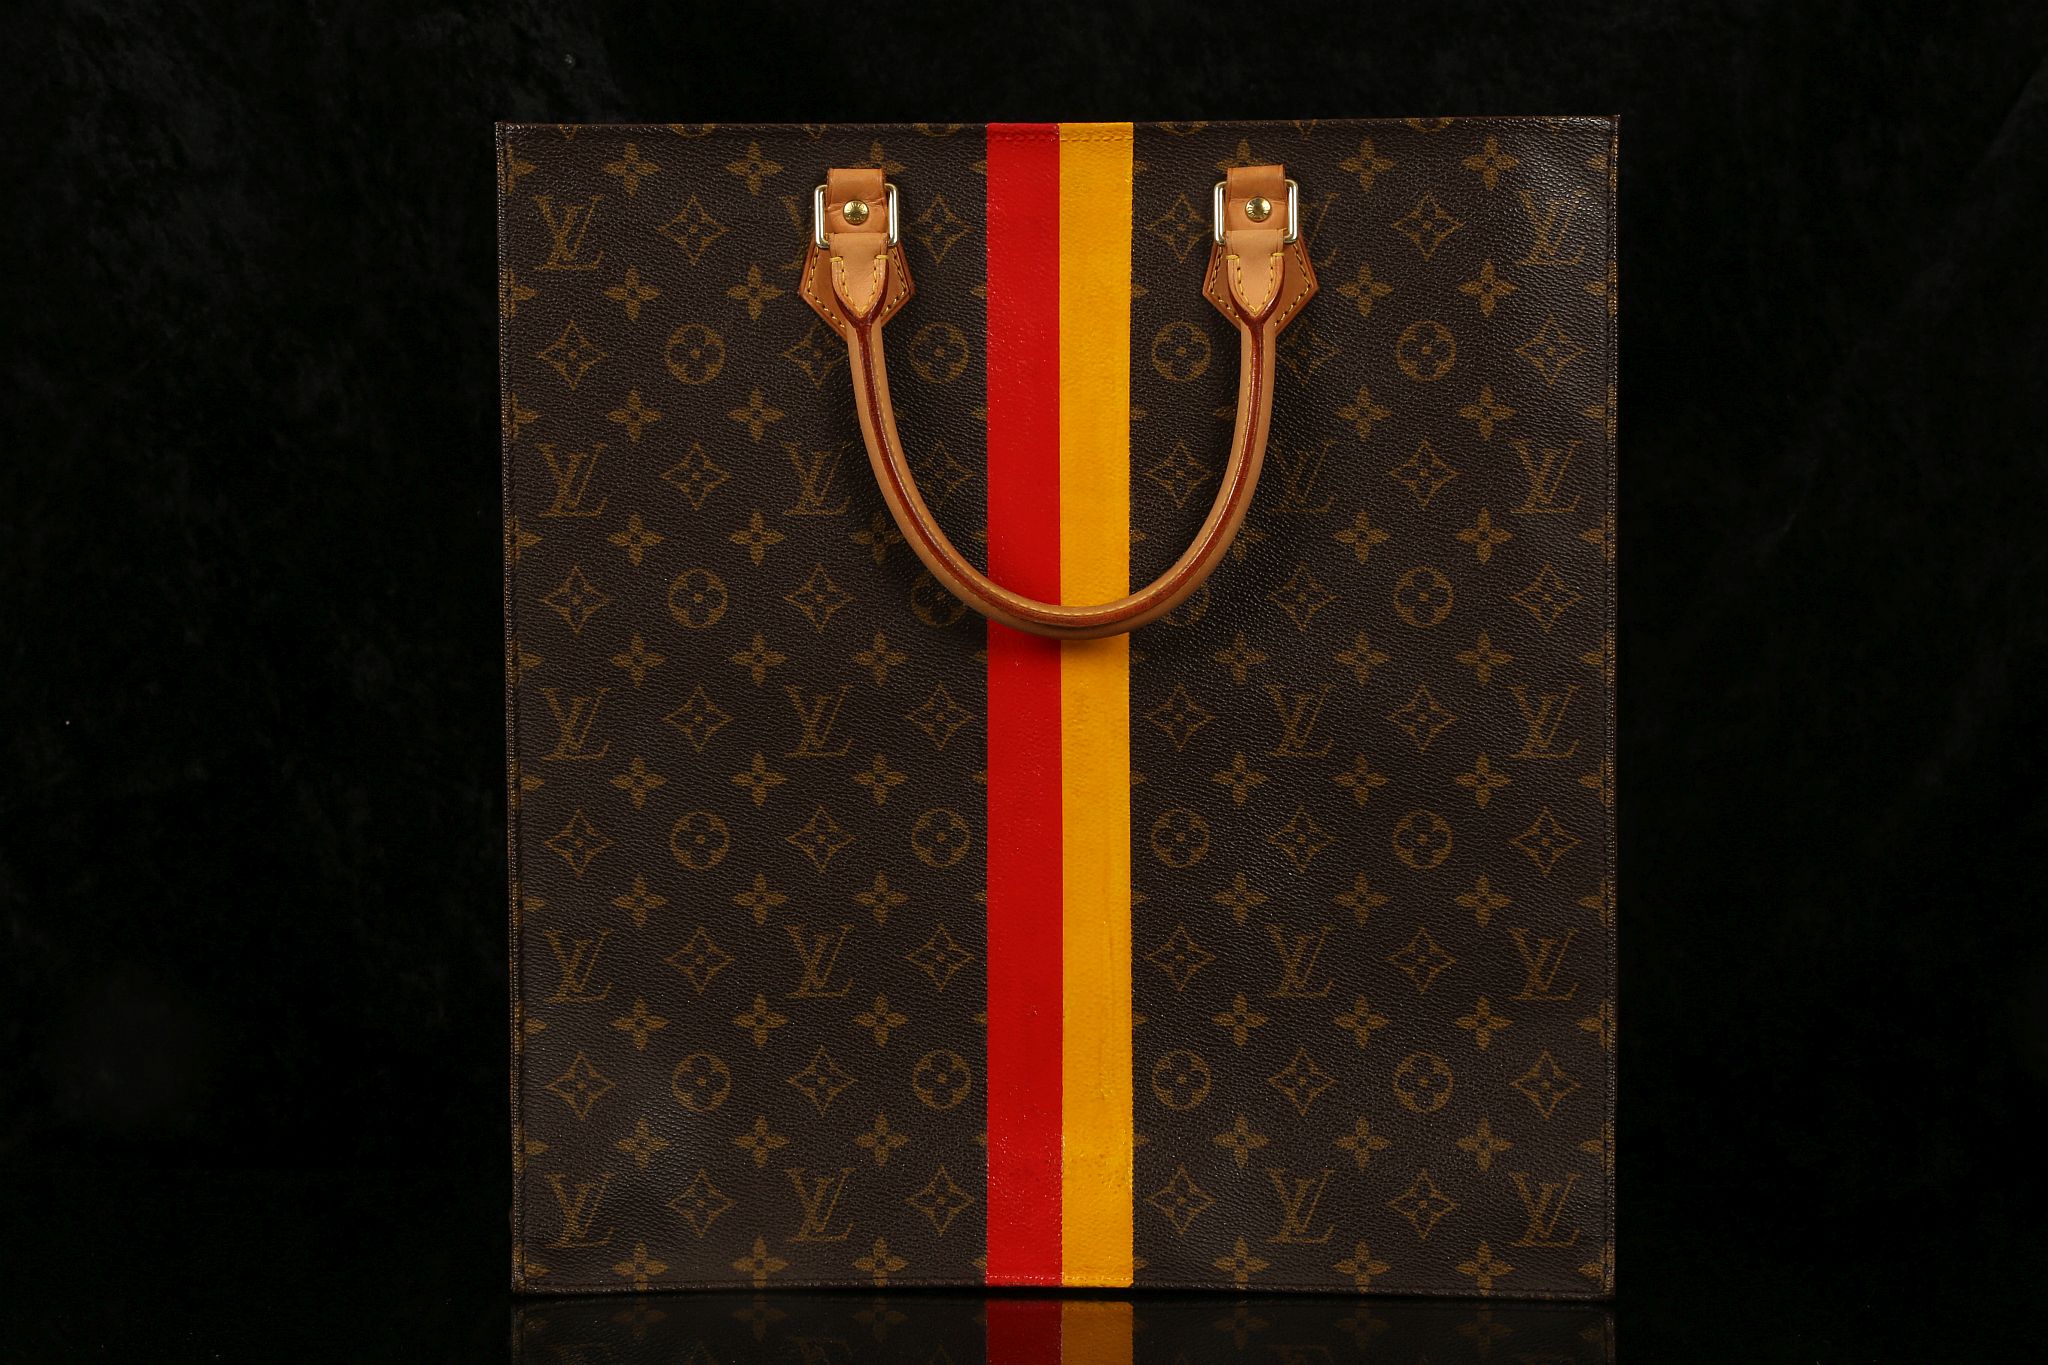 LOUIS VUITTON PLAT HANDBAG, date code for 2004, monogram canvas with leather trim and painted red - Image 3 of 16